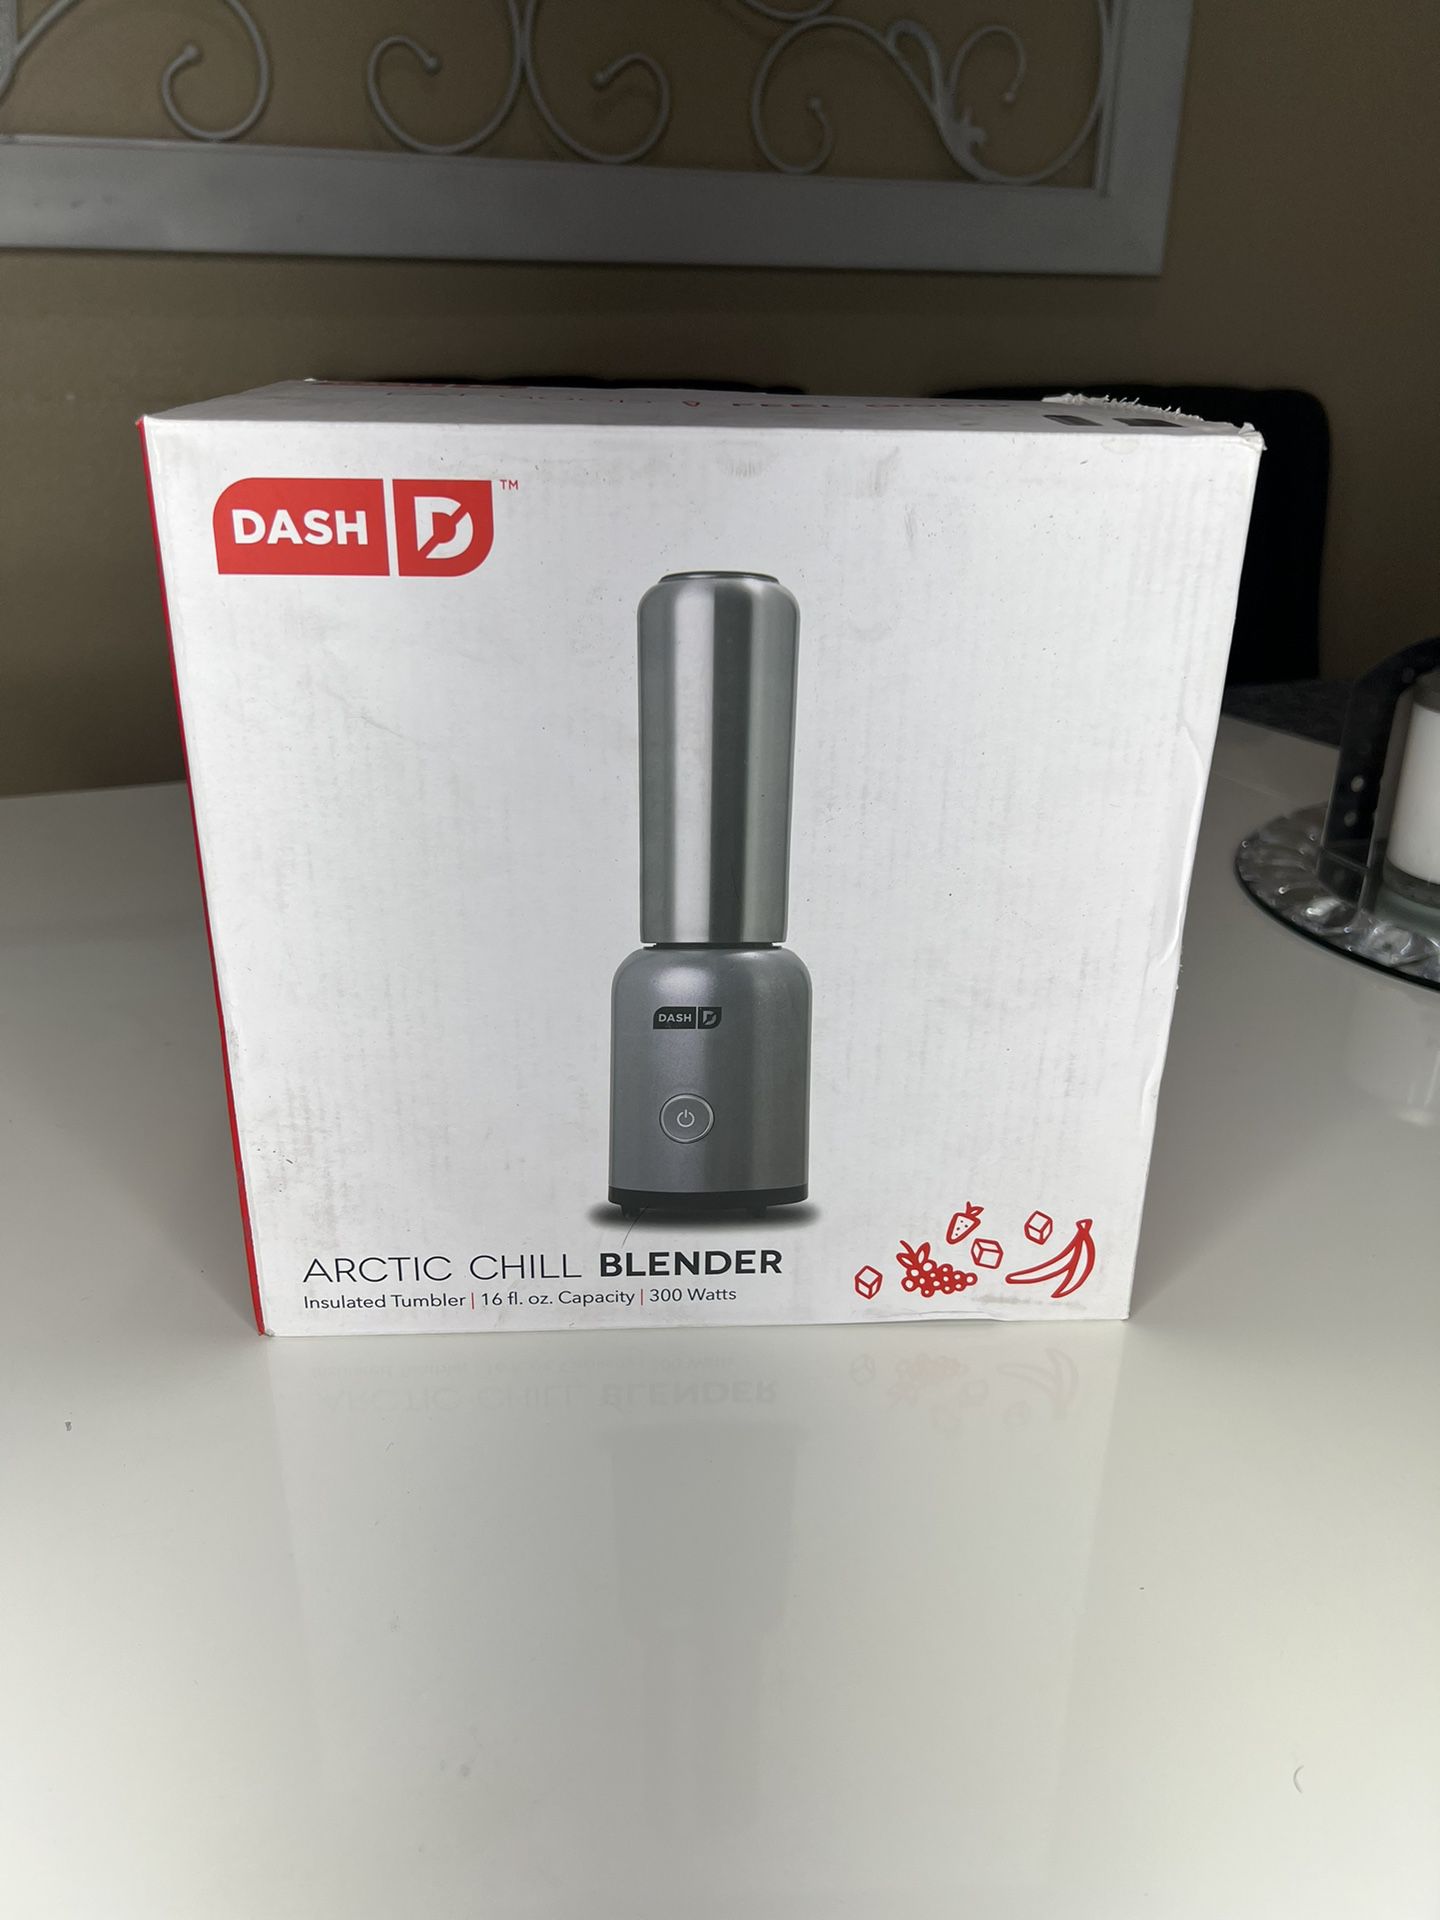 Have you used The Dash Arctic Chill Blender? 